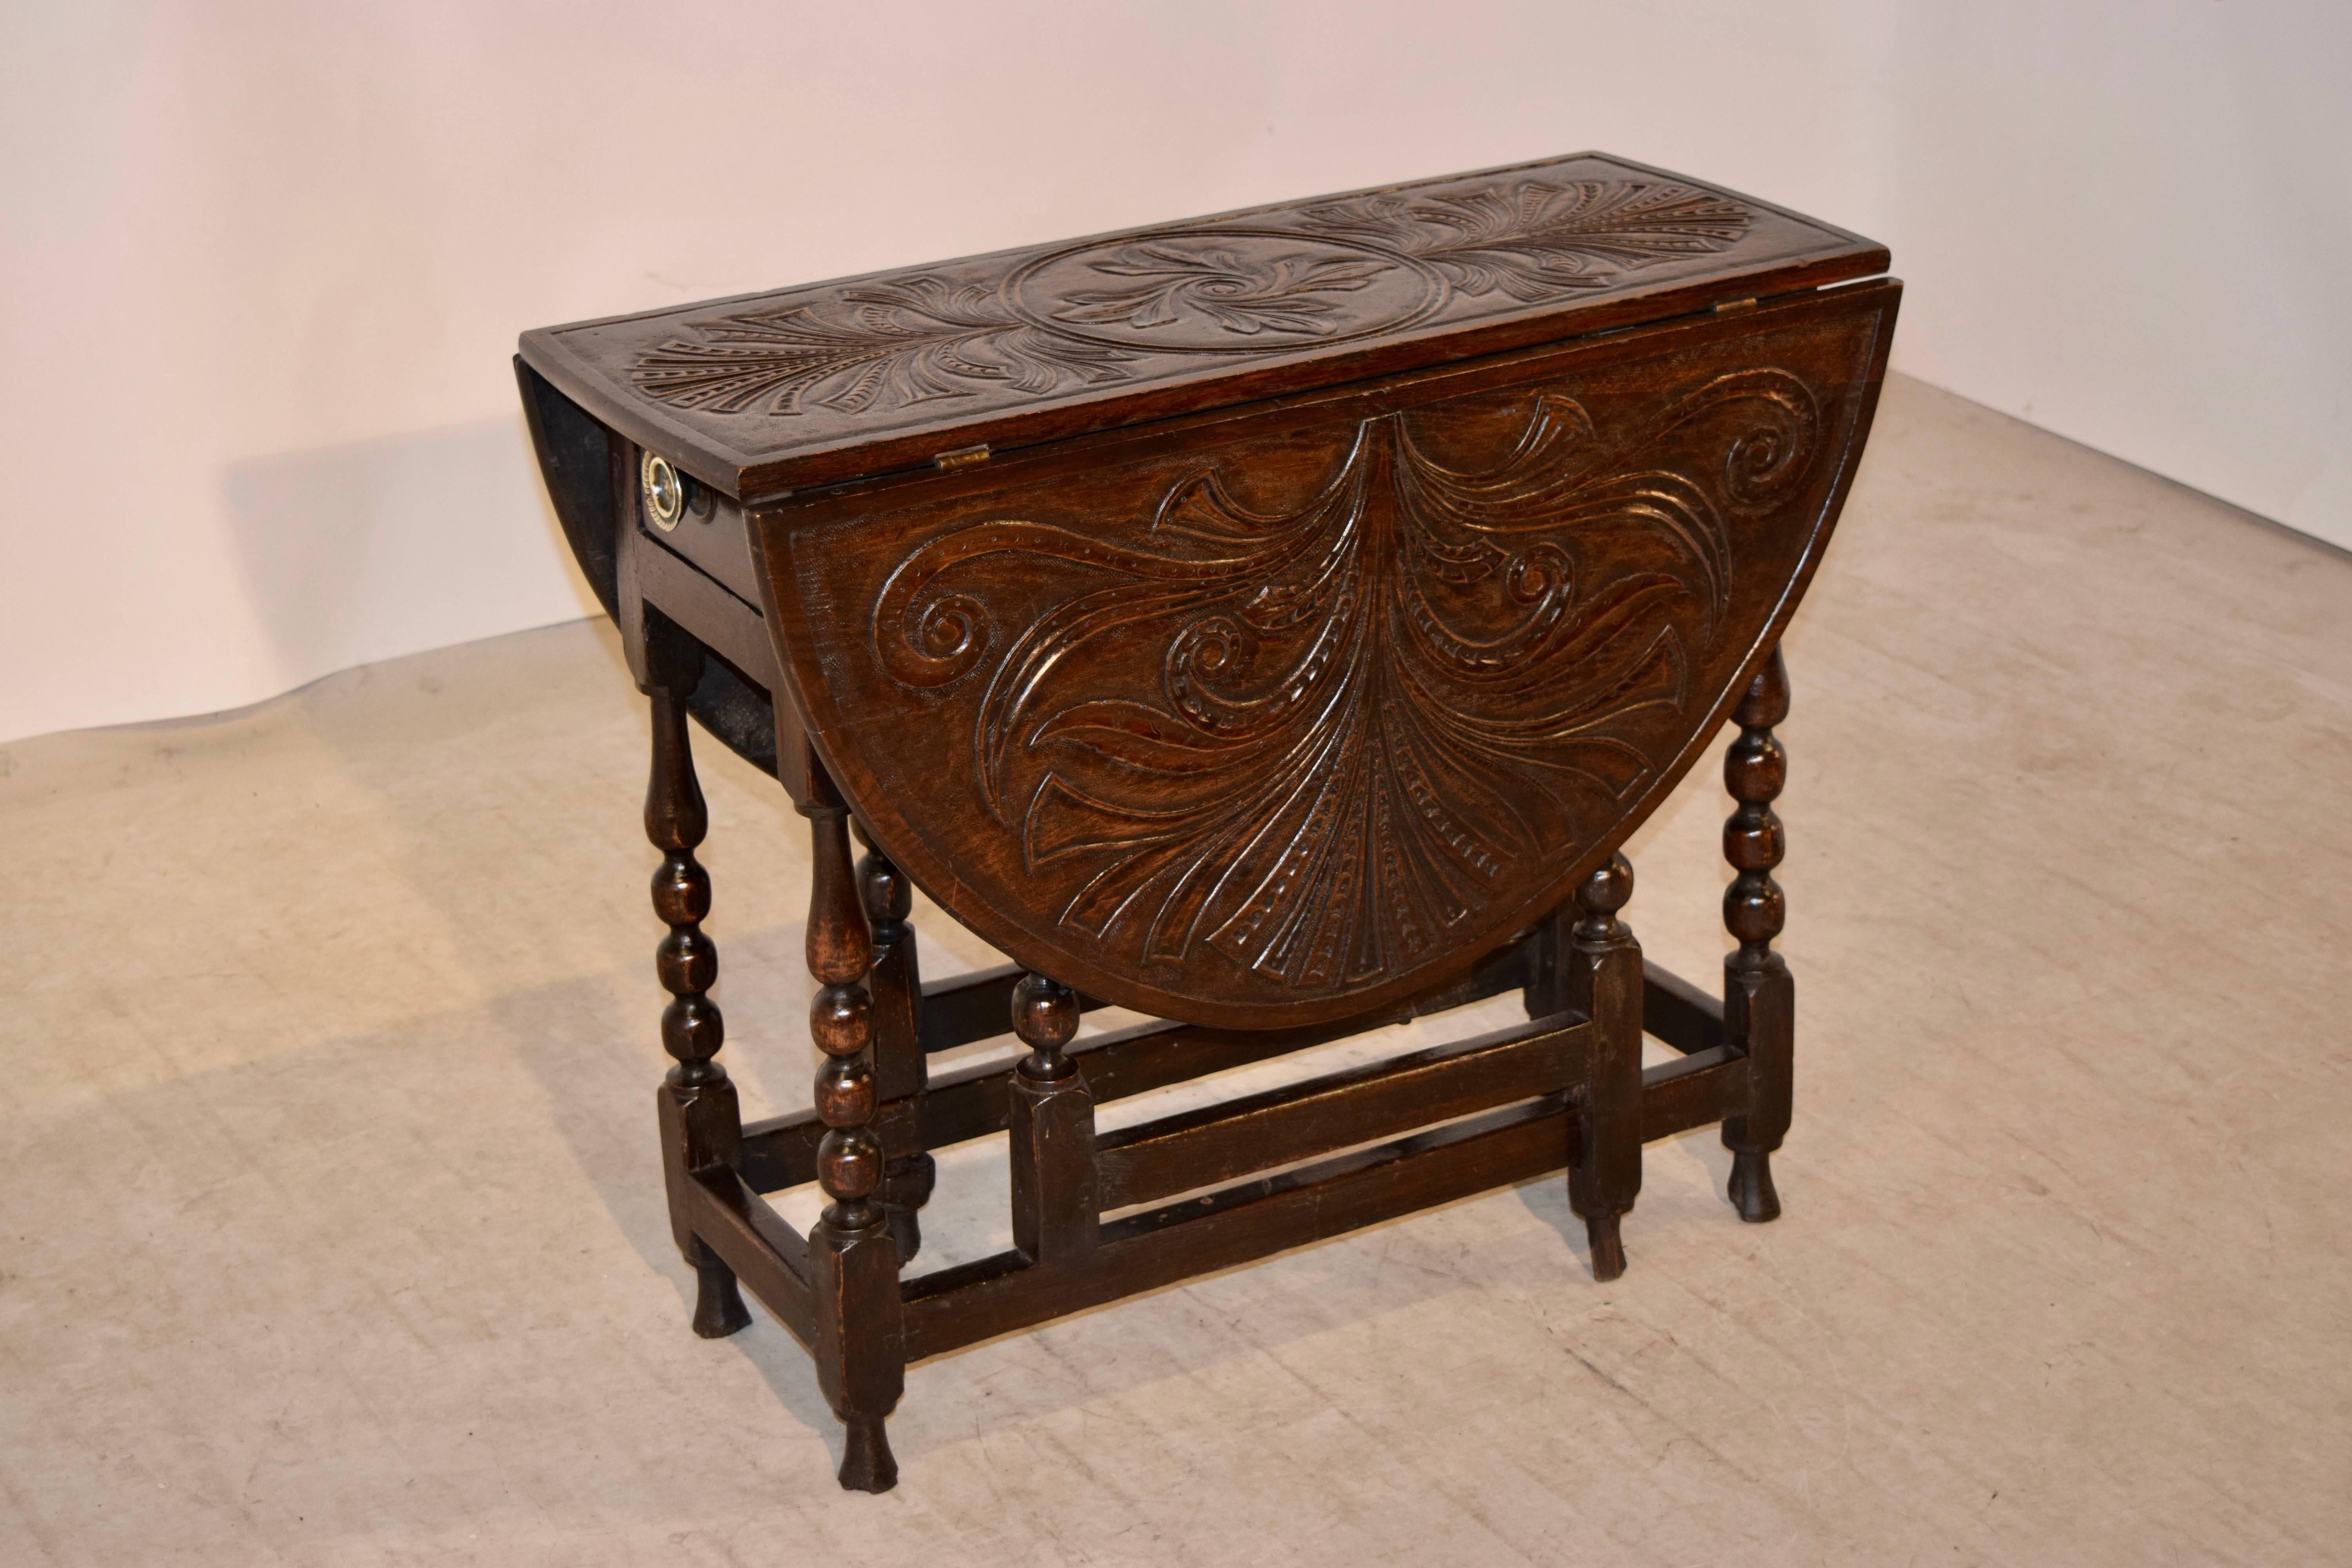 18th century carved oak gateleg from England. The top has a rounded edge and is wonderfully hand-carved all-over the top. The base has a simple apron which contains a single drawer. The legs are hand-turned and have wear from age. They are joined by